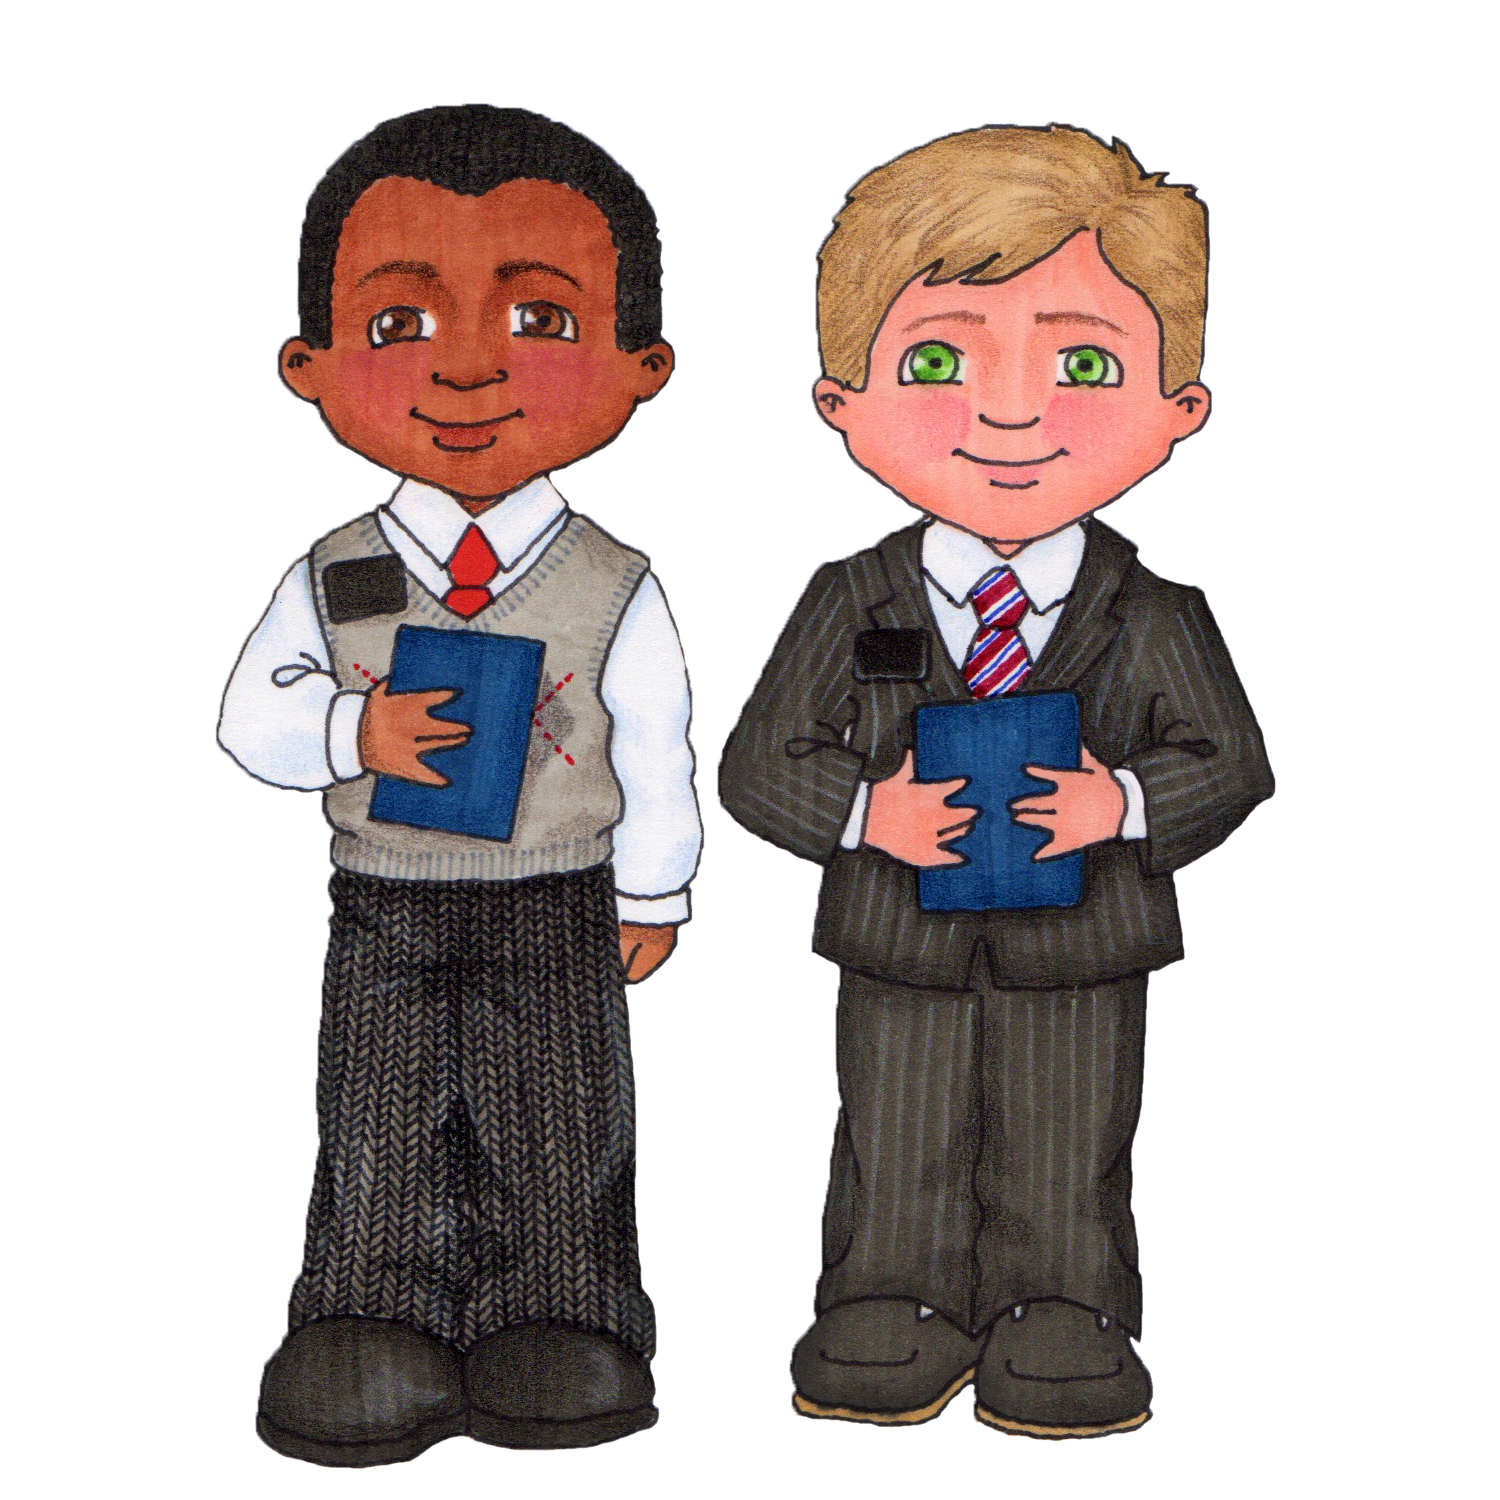 Missionaries Christ Latter-Day Of Saints Jesus Church PNG Image